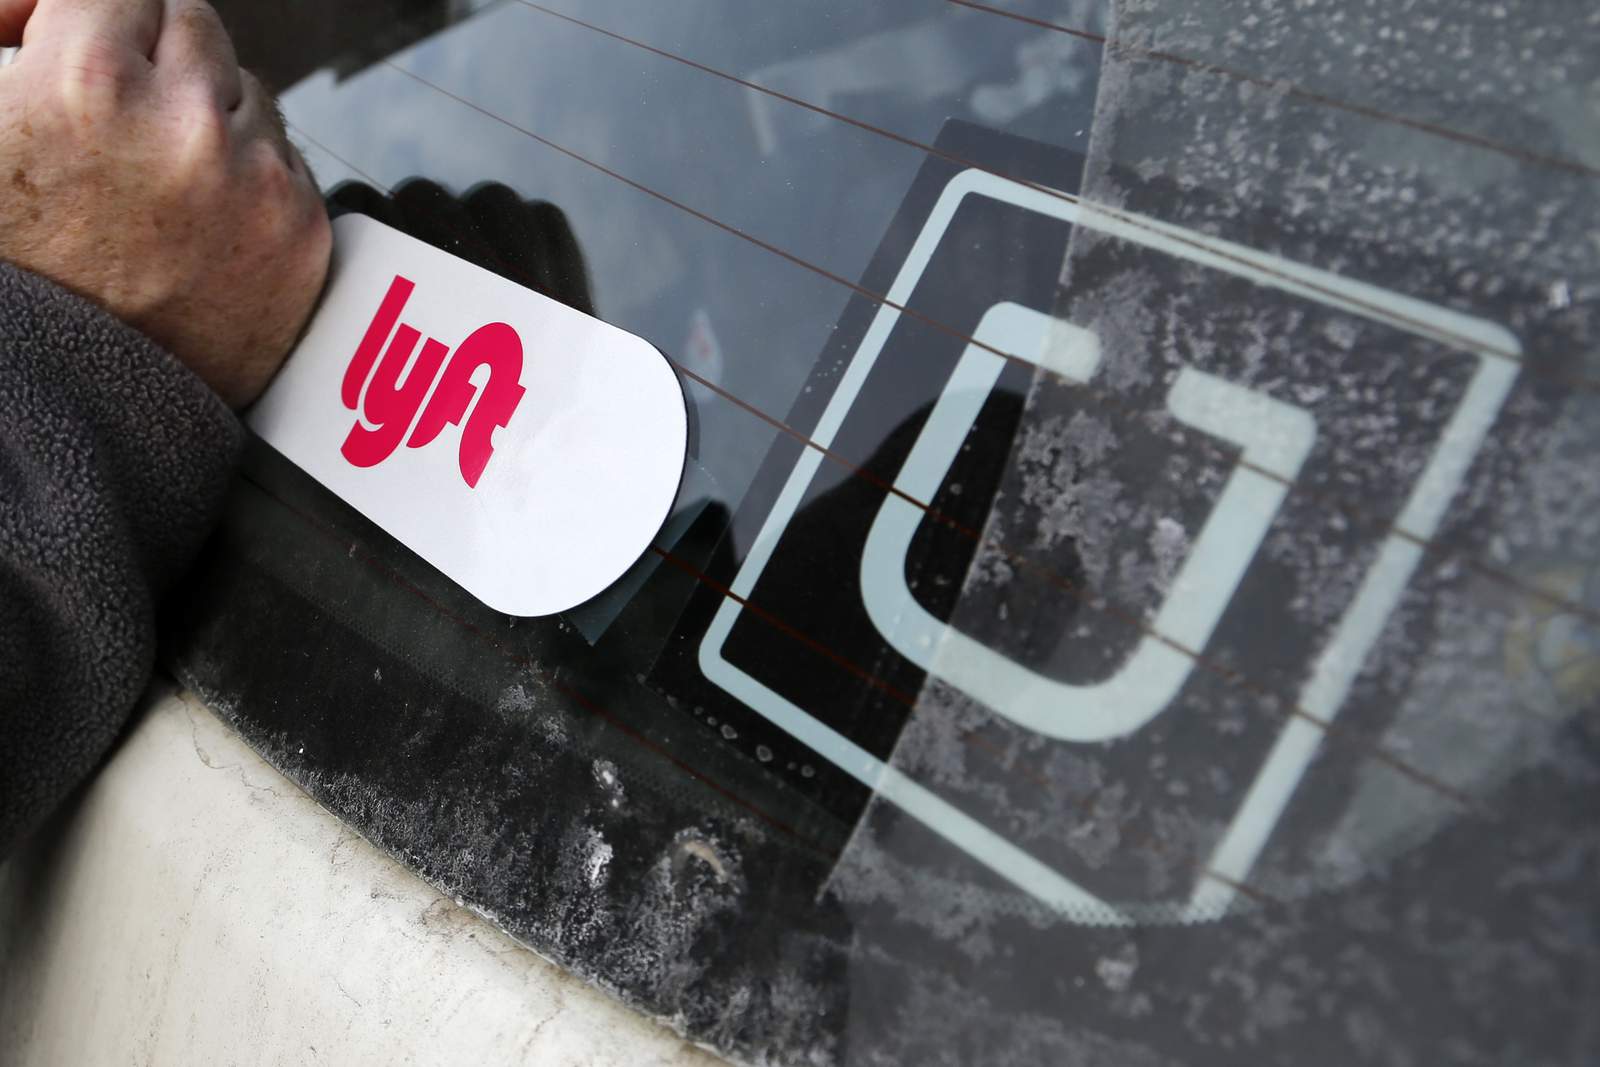 California judge rules Uber, Lyft drivers are employees